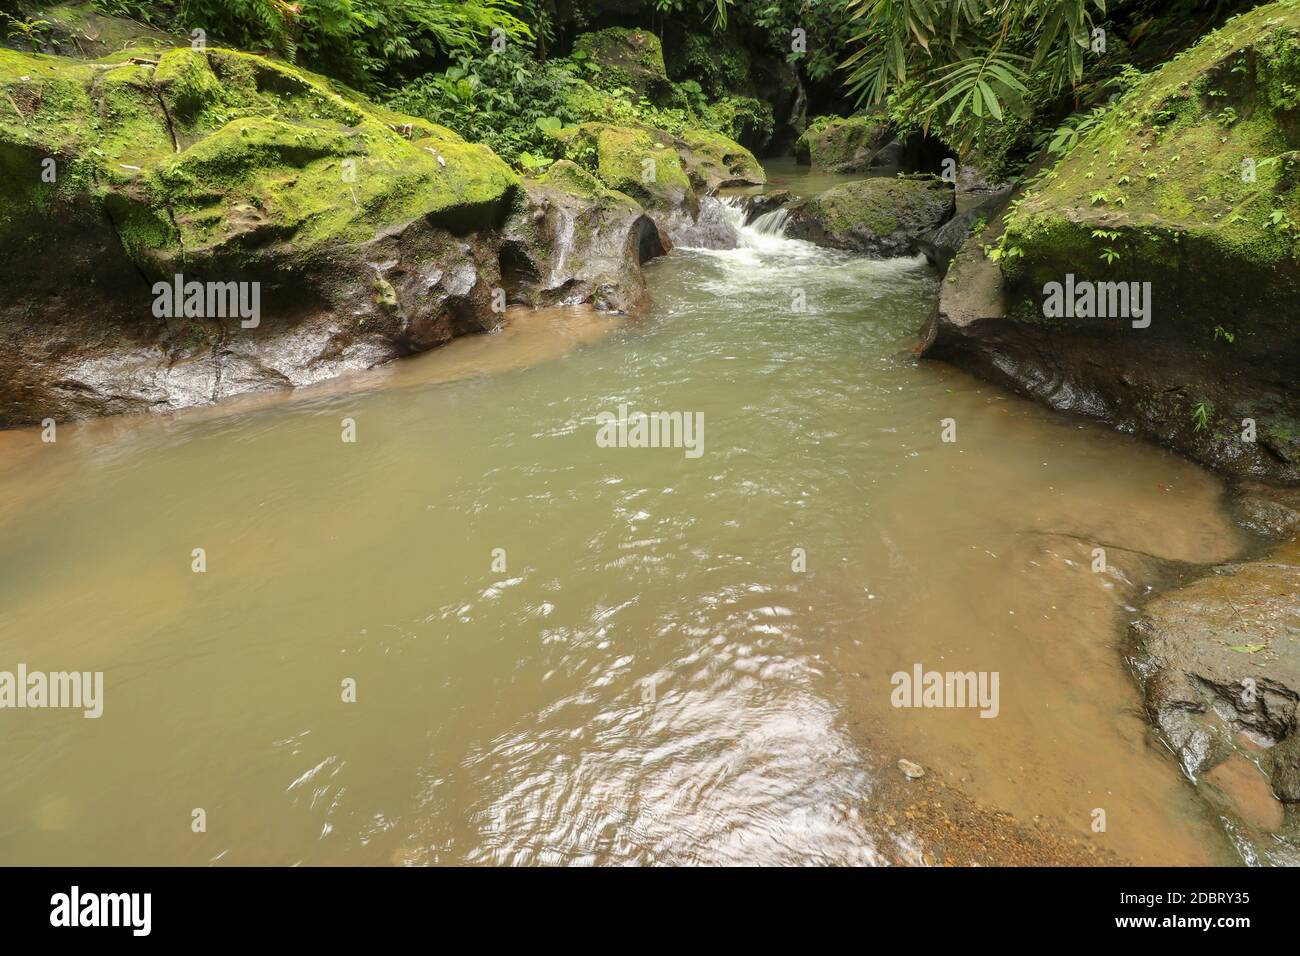 Beautiful texture of stone riverbed polished by mountain river flow surrounded by wild rainforest on a sunny summer day. Bali, Indonesia. Stock Photo